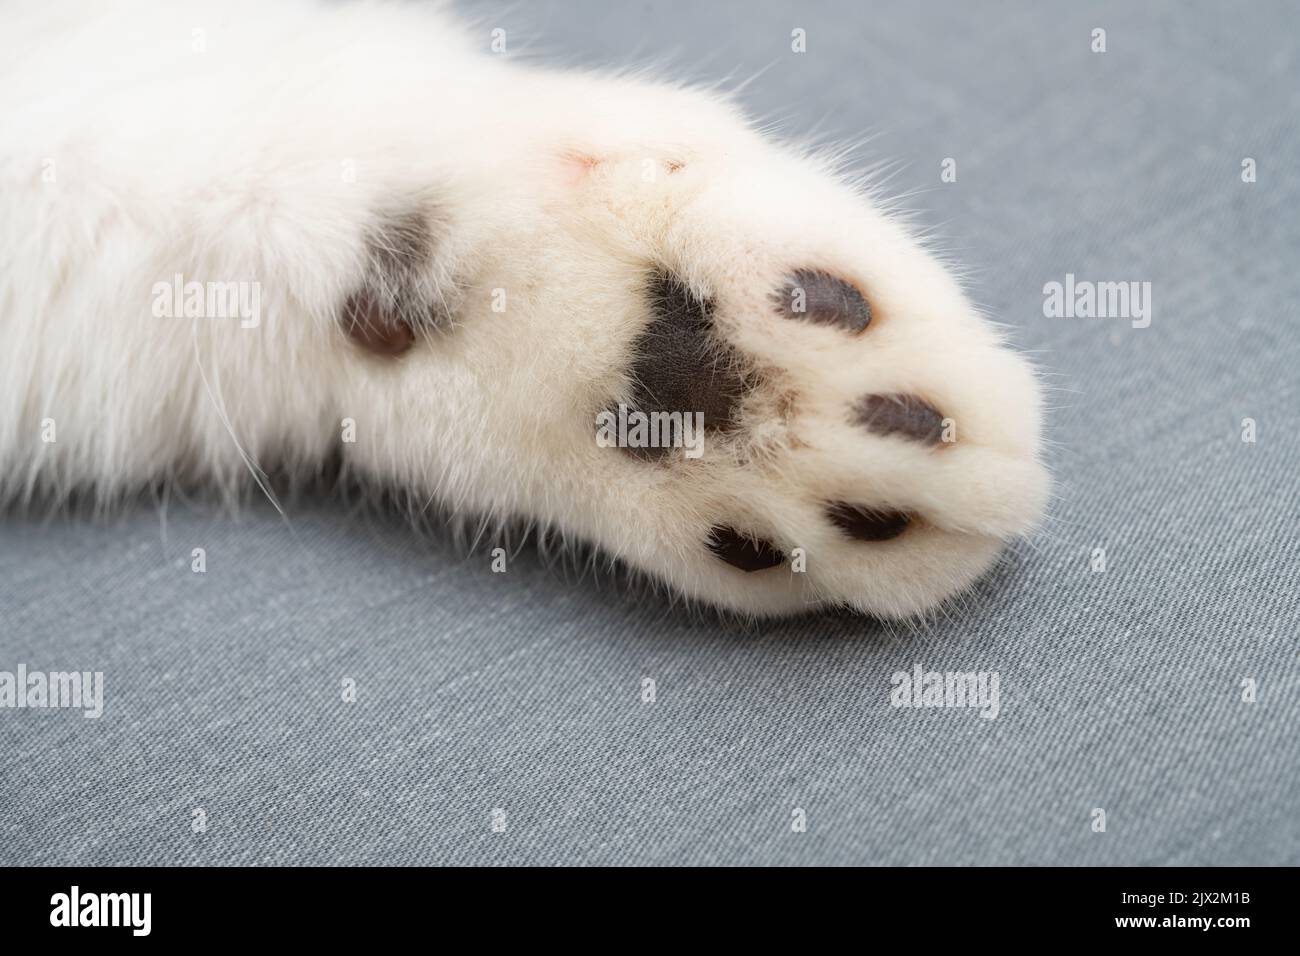 a cats paw close up Stock Photo